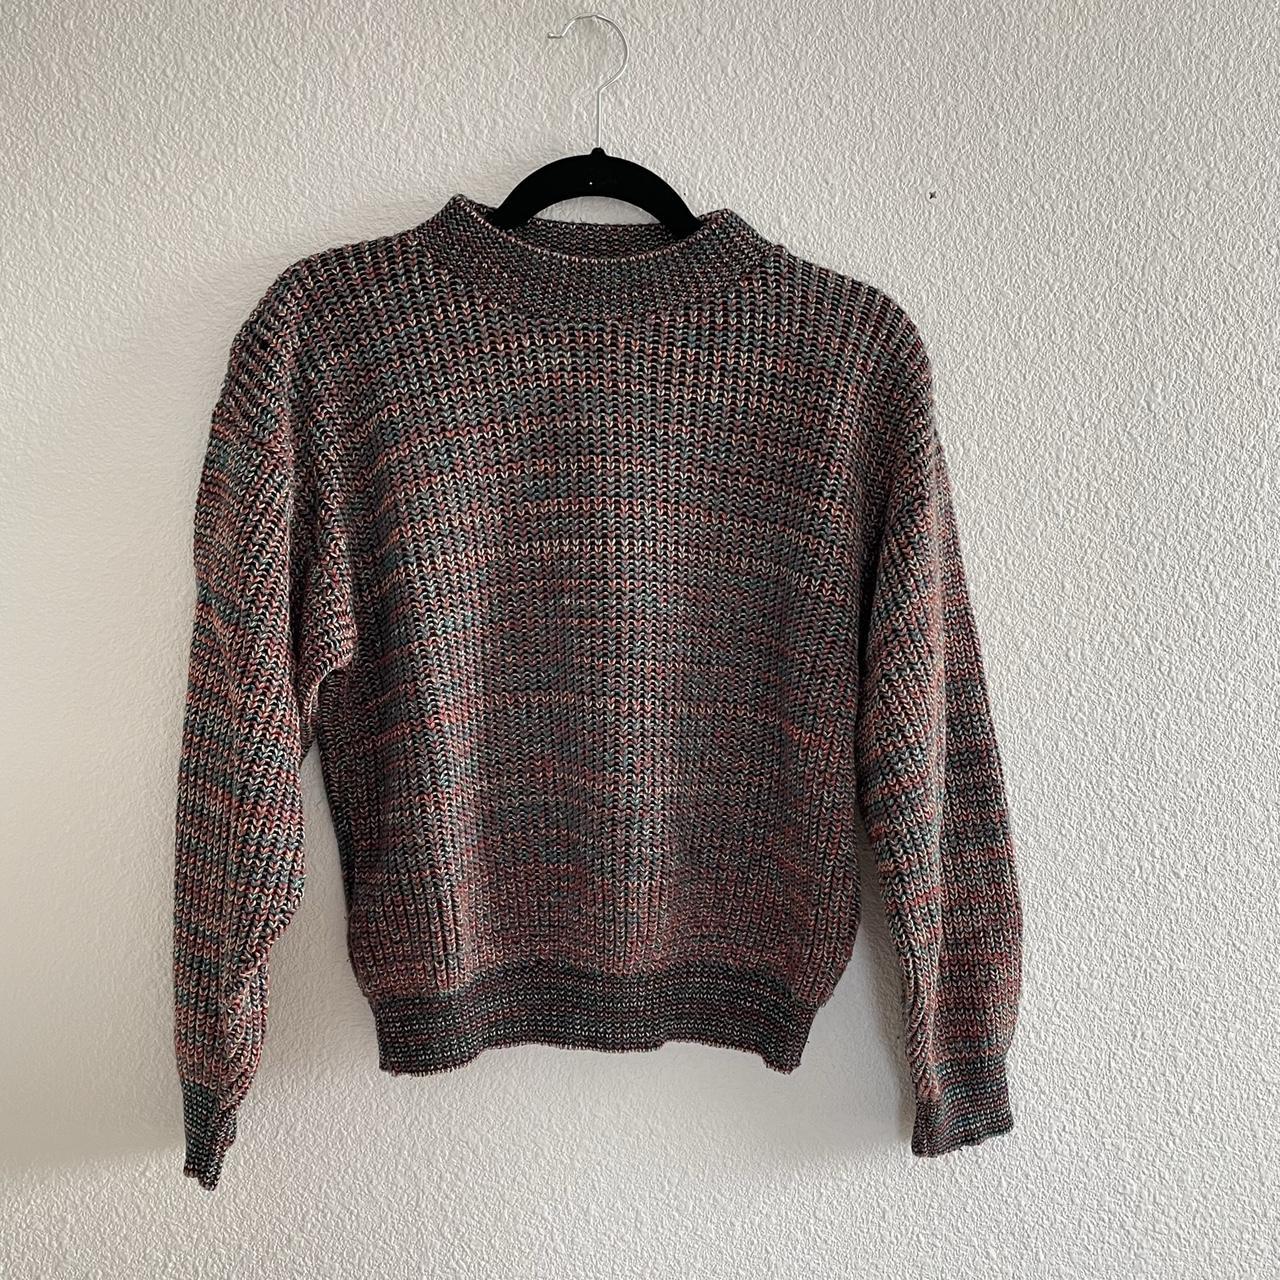 Vintage Sweater Repop No size available but I’d say... - Depop